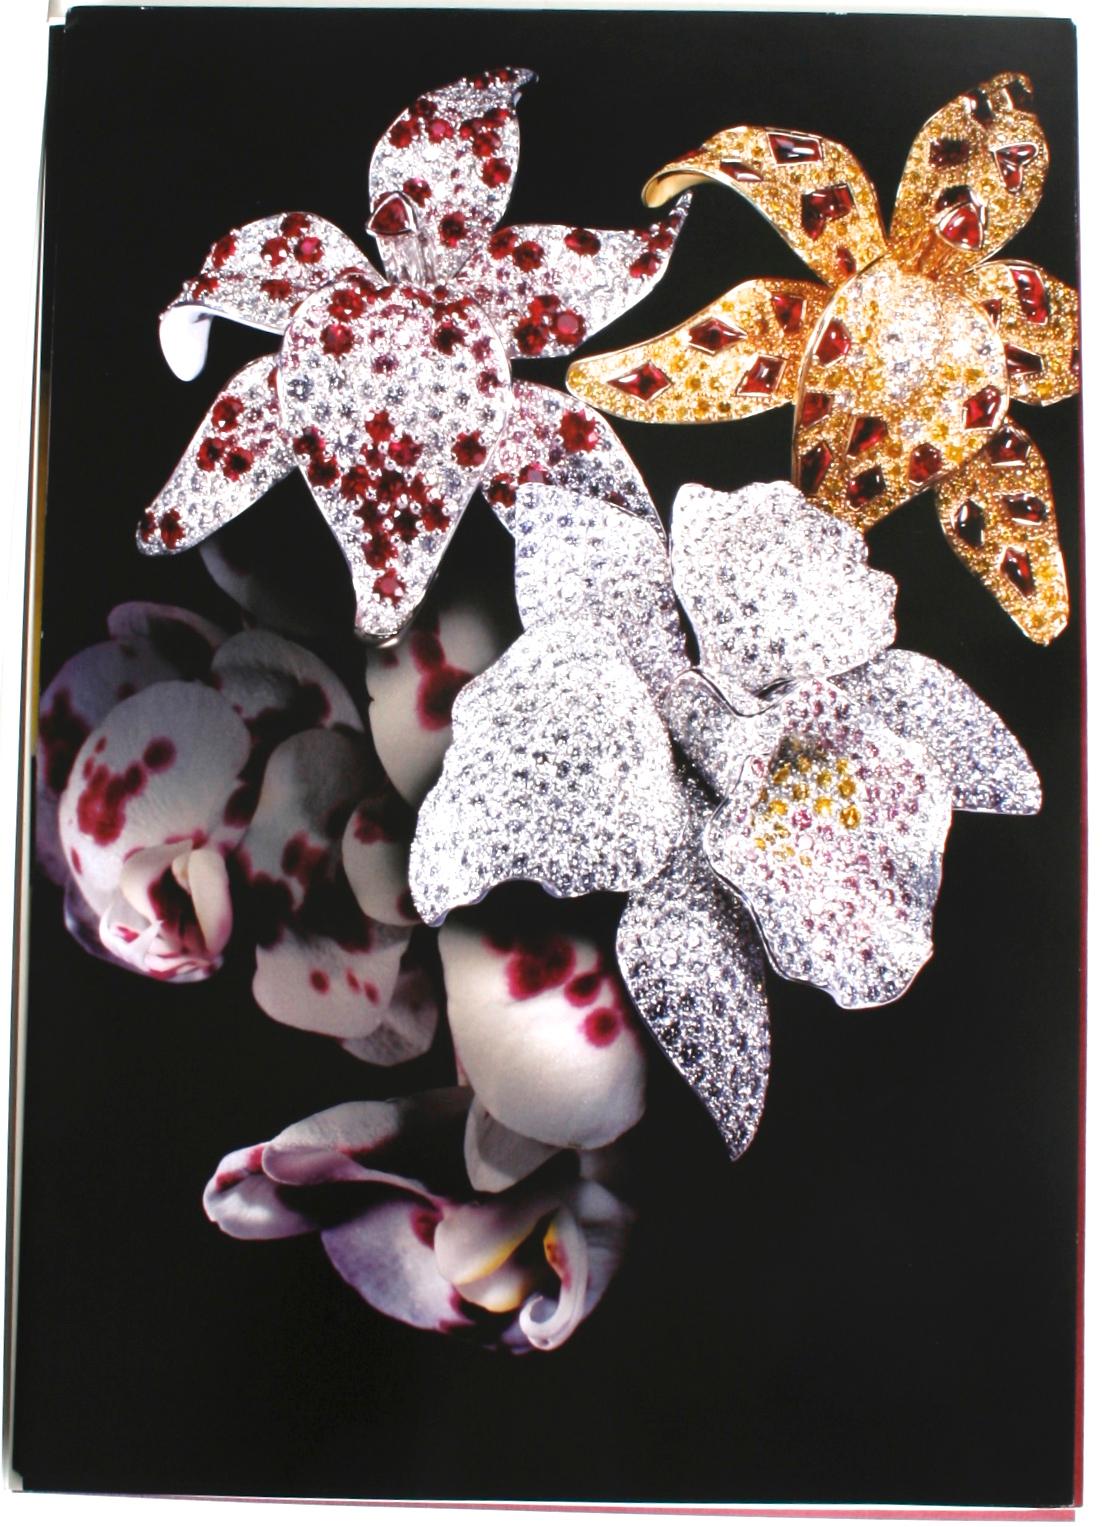 Cartier Folio of Photos and Floral Jewelry Designs with 2 Original CD's, 2005 For Sale 1